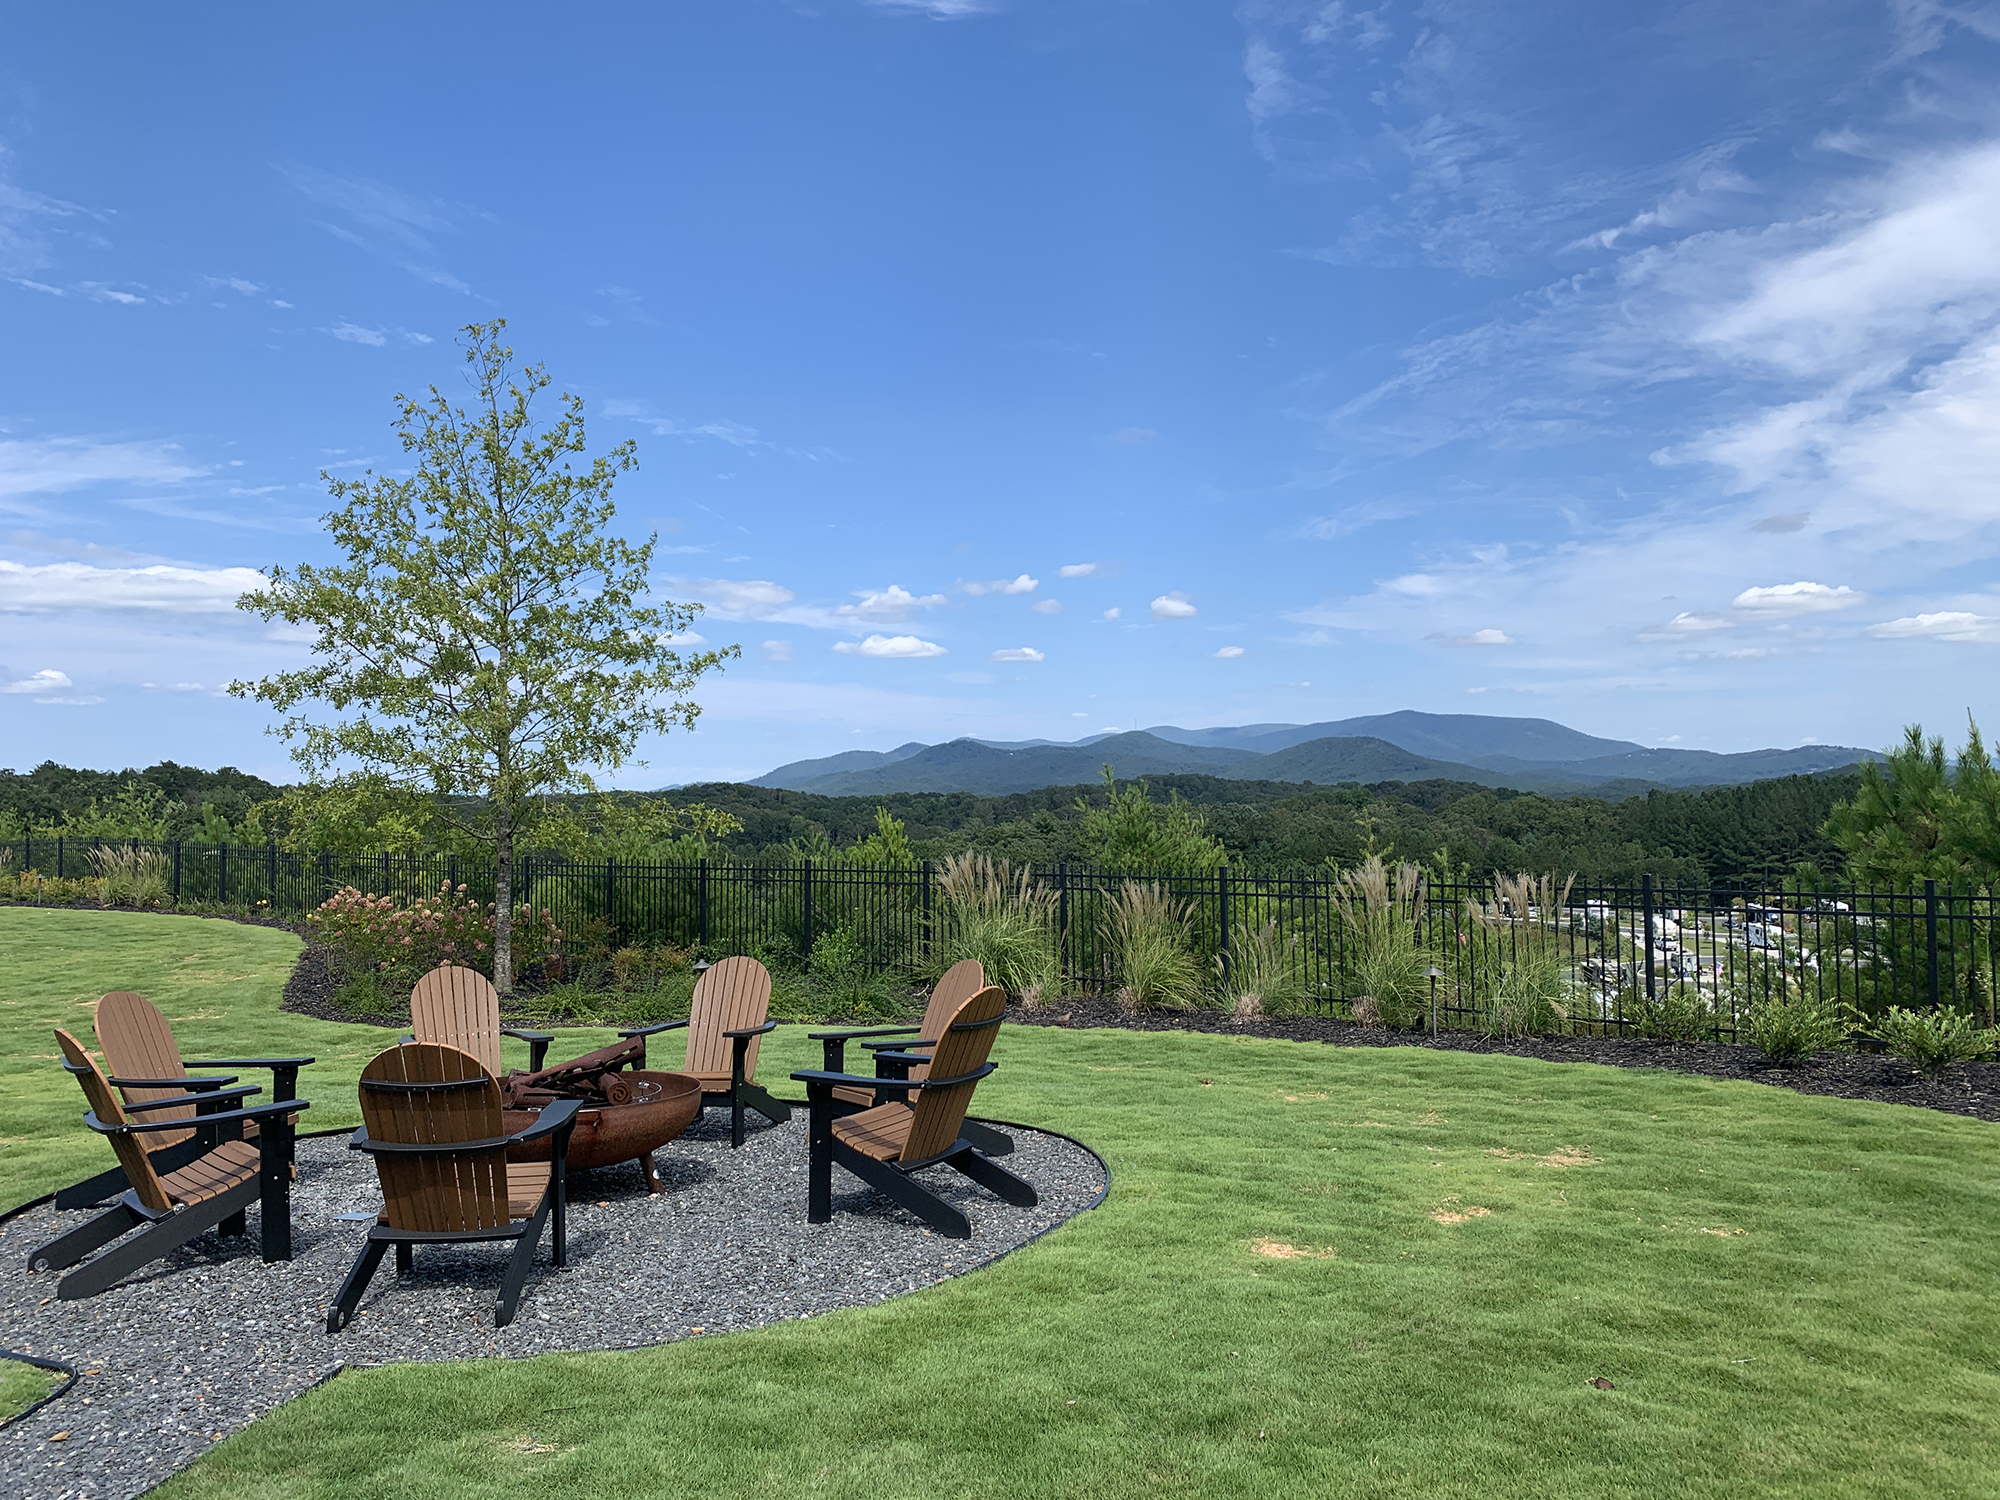 Adirondack chairs arrayed around a table with sweeping view in background.